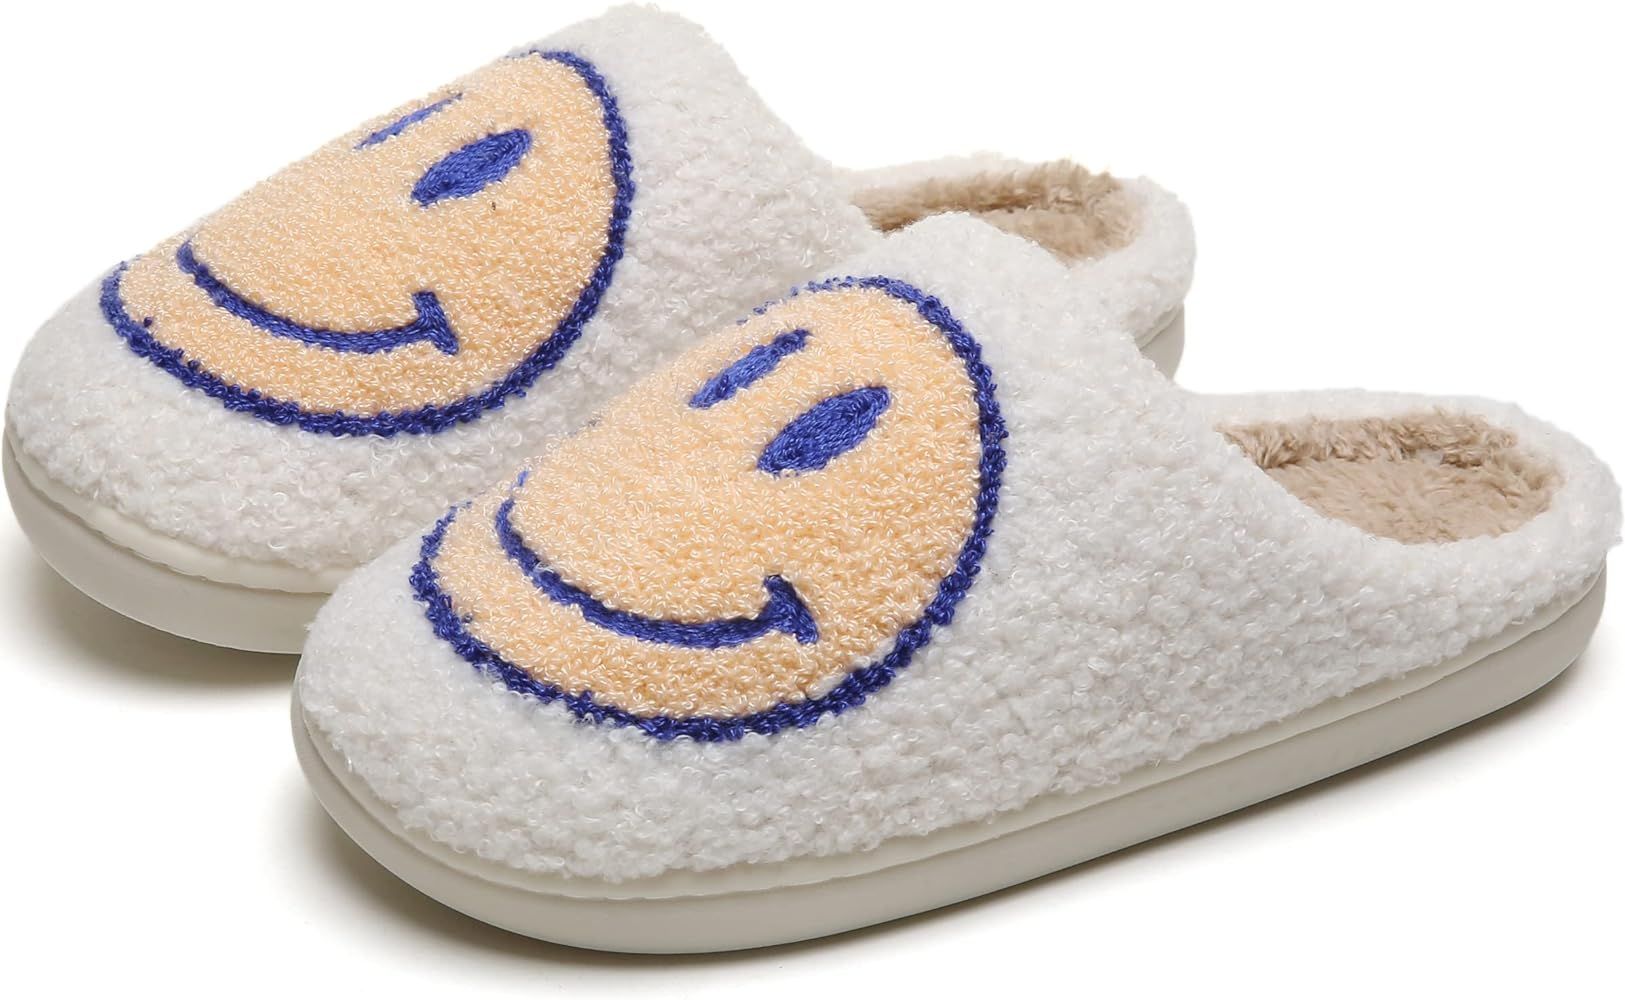 Slippers for women indoor and outdoor men open toe fluffy cute smiley face slippers | Amazon (US)